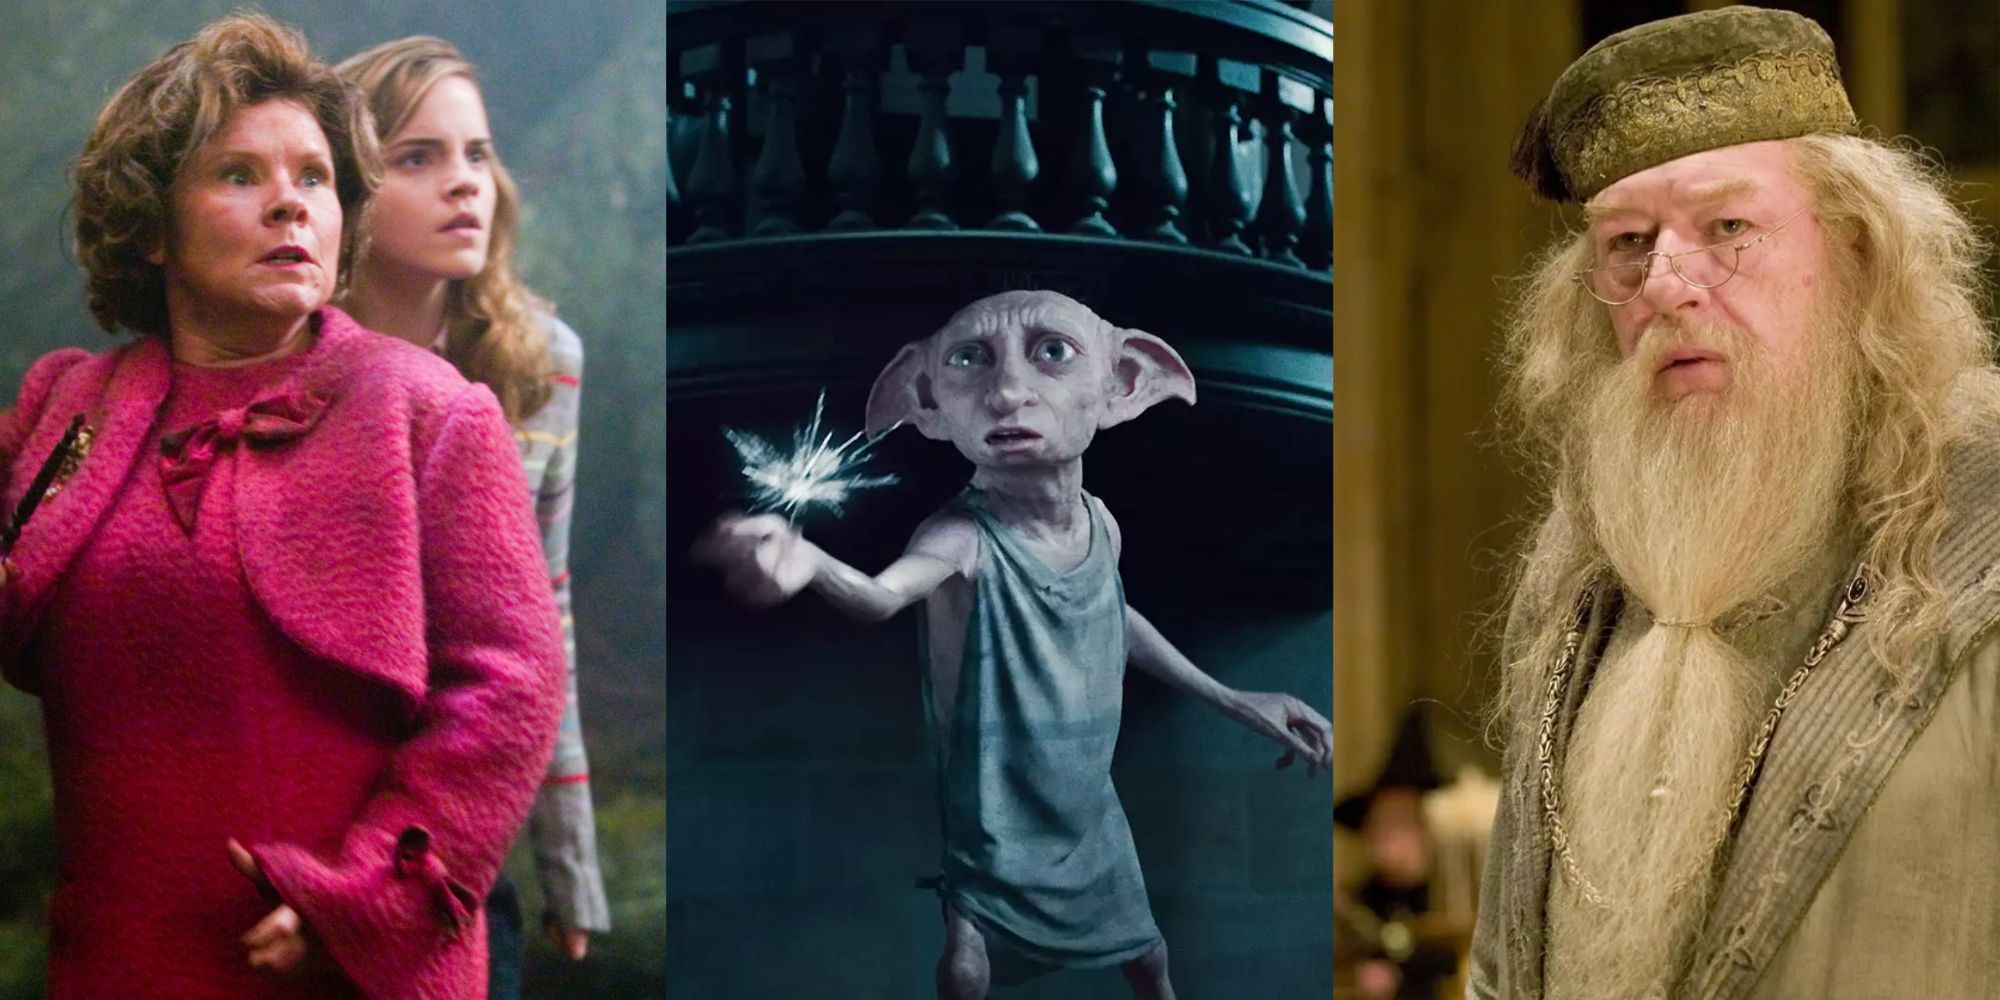 A split image of Dolores Umbridge, Hermione Granger, Dobby the House-Elf, and Dumbledore in Harry Potter